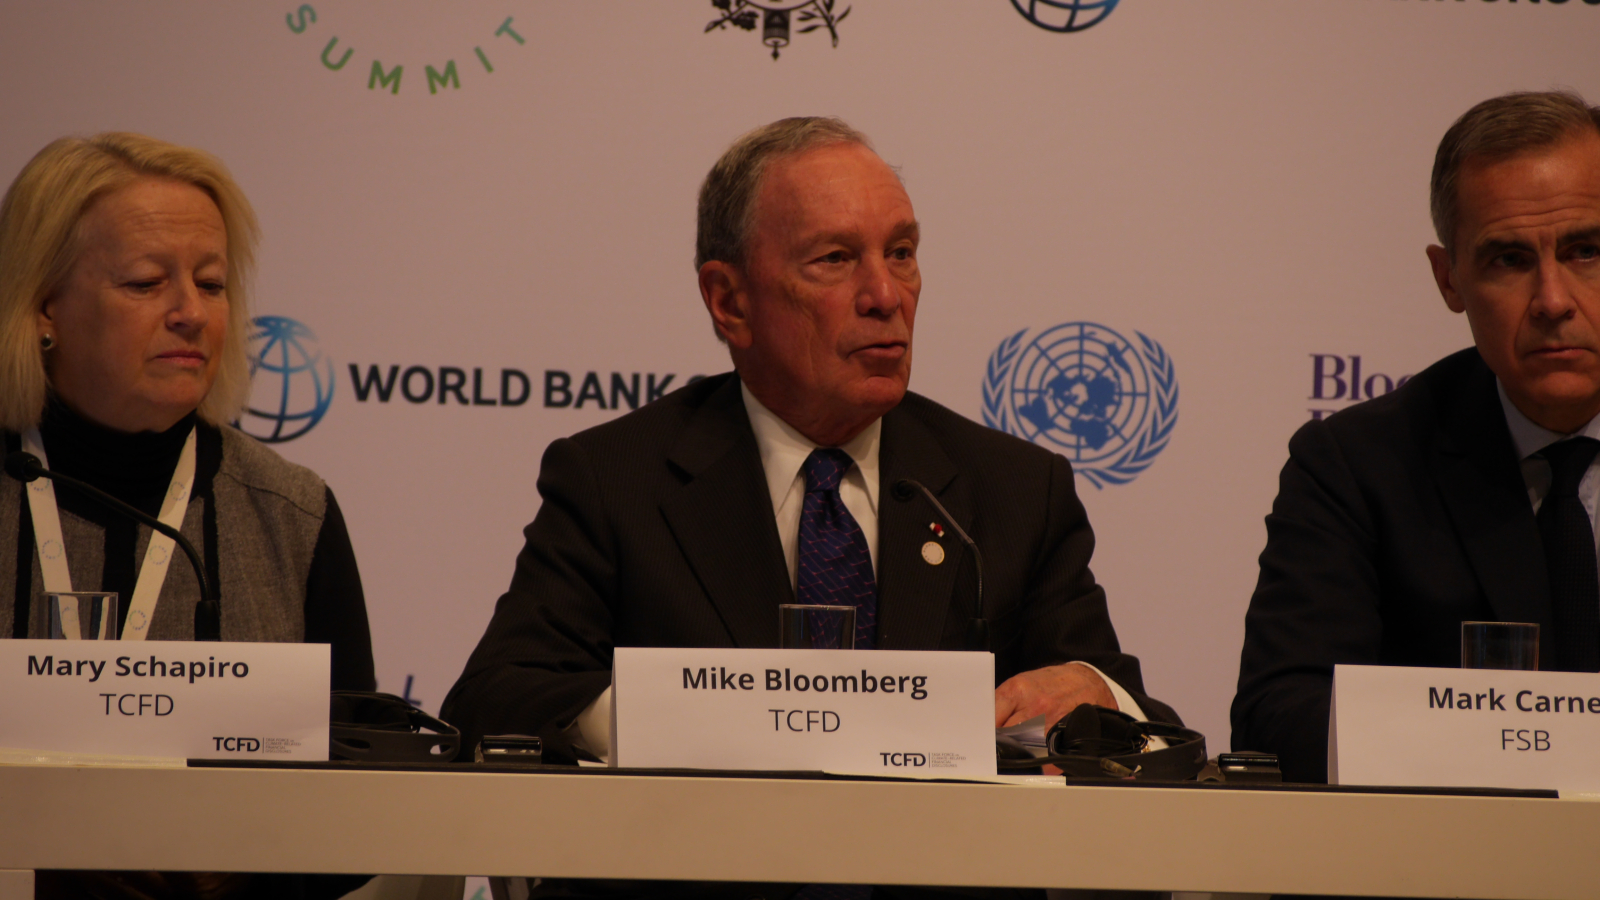 Michael Bloomberg, finance, climate change